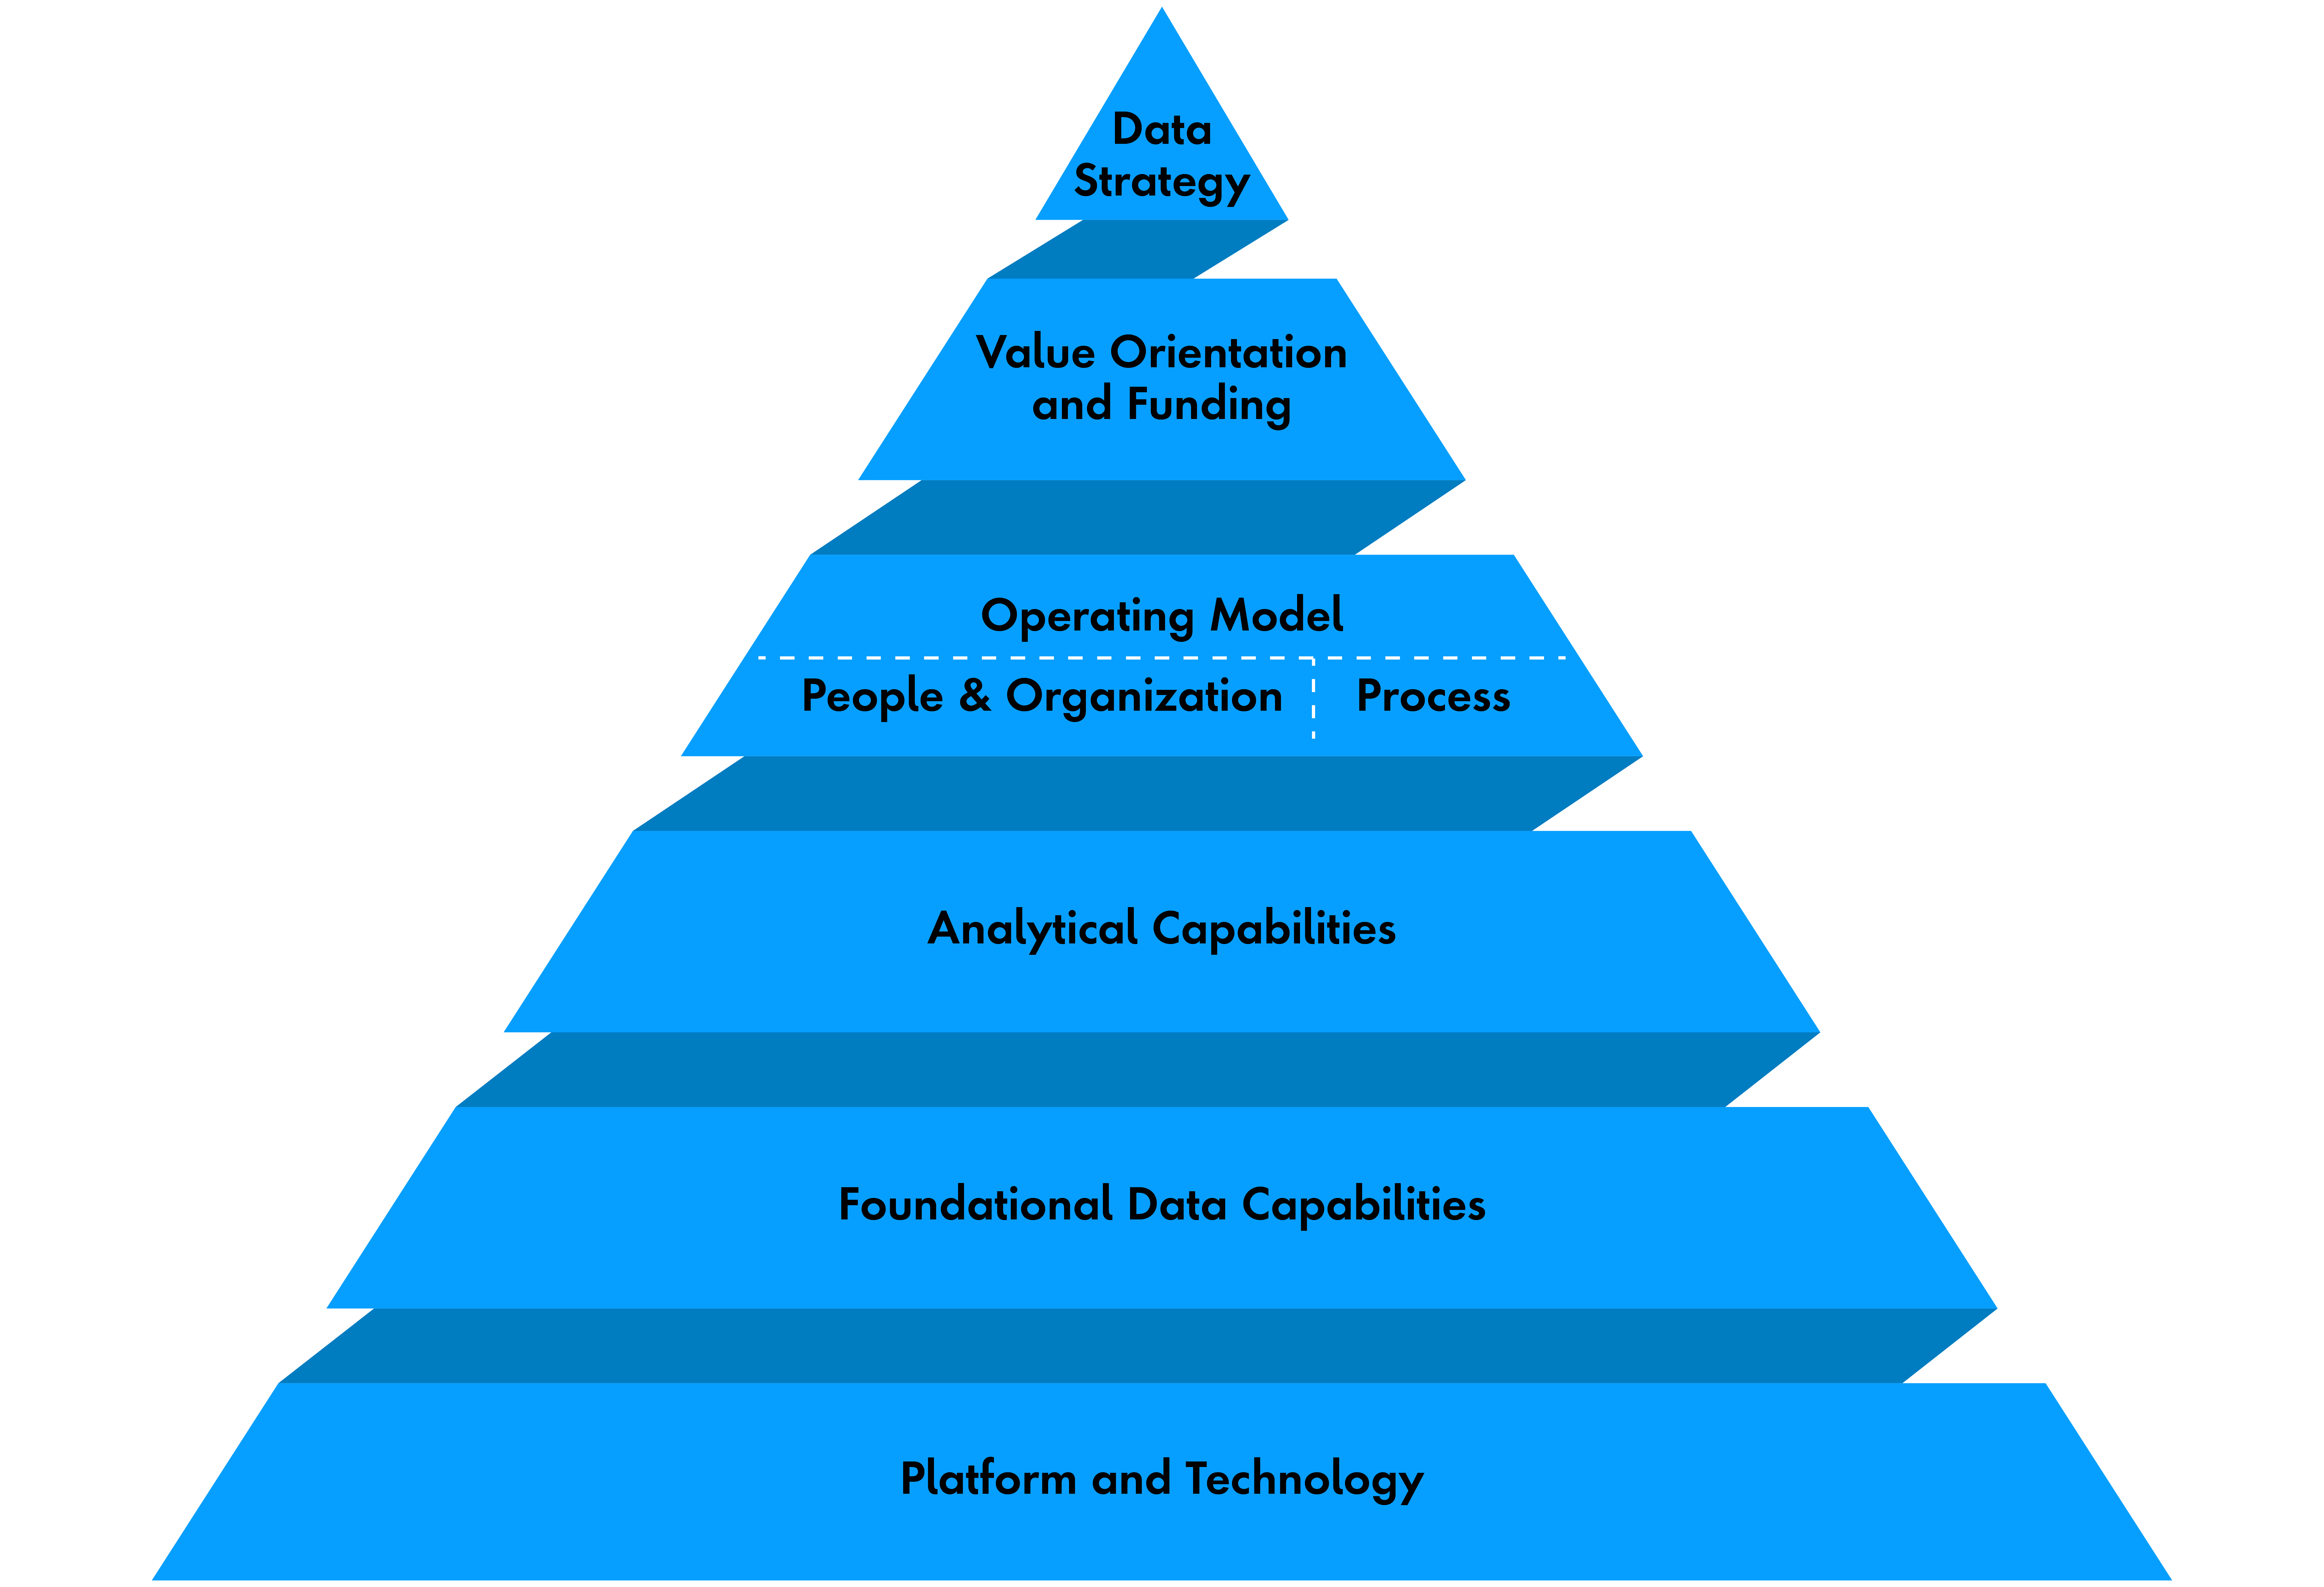 solid foundation of technology, capabilities and processes enable strategy